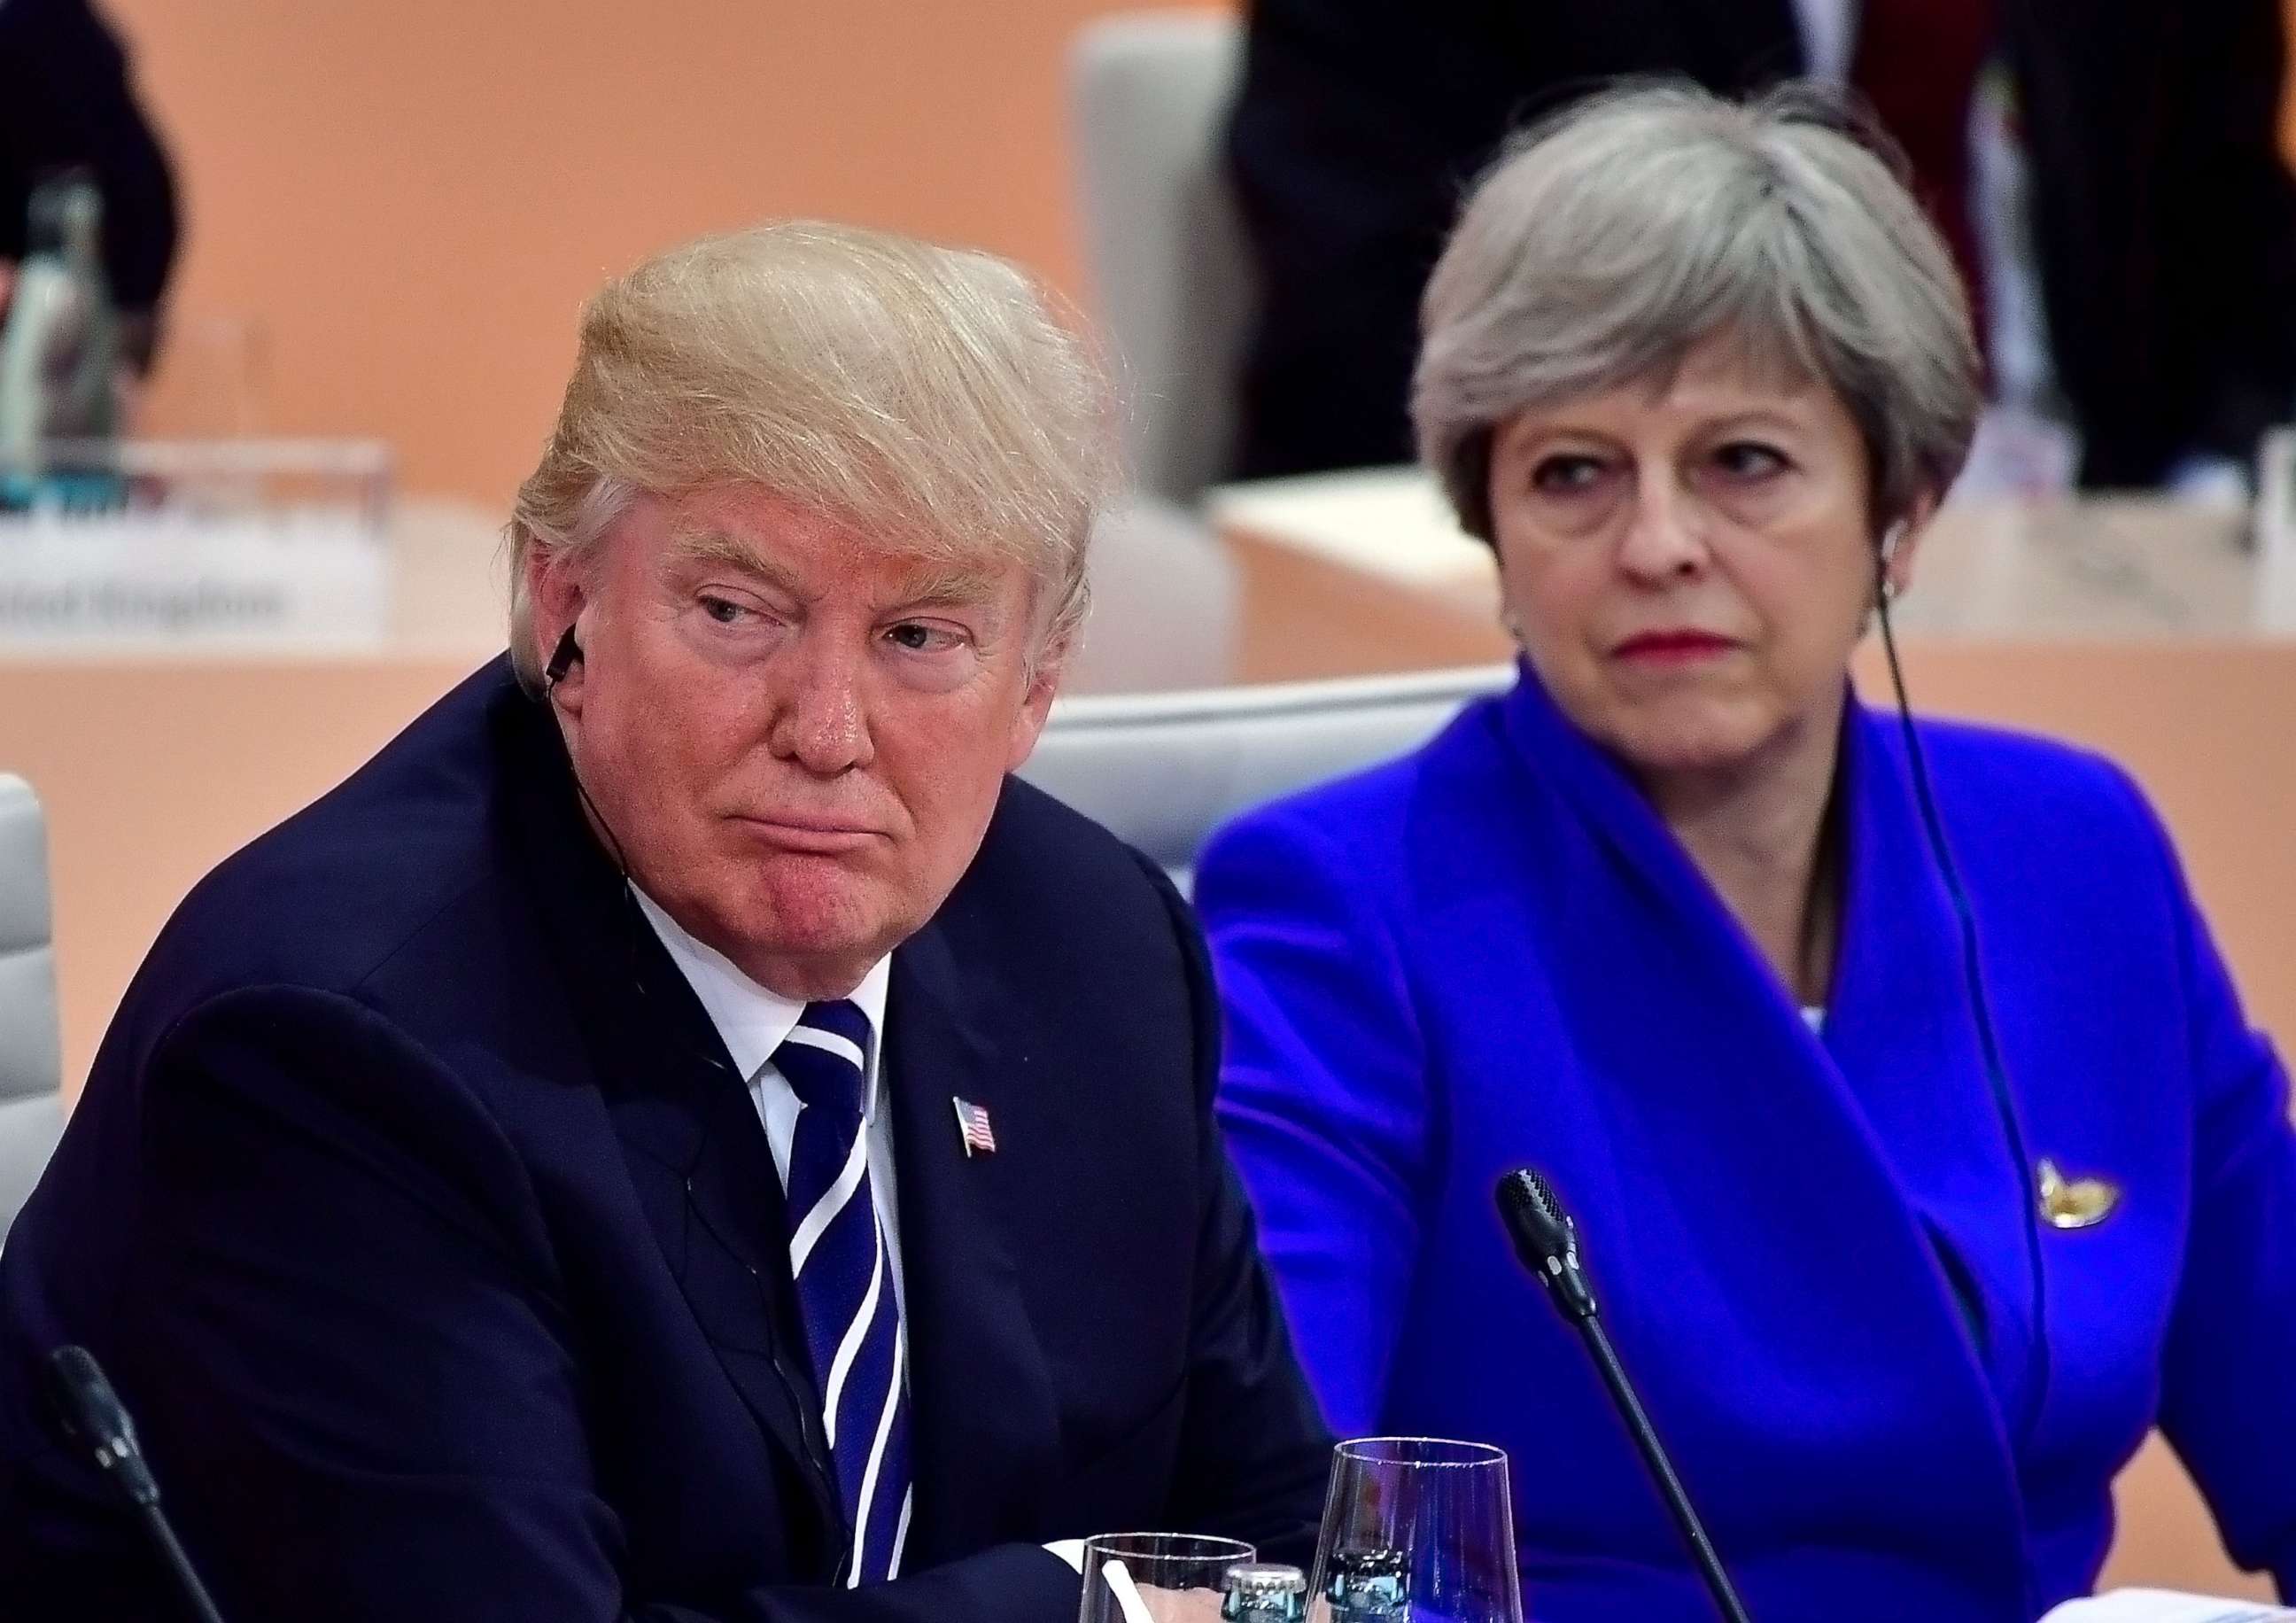 PHOTO: President Donald Trump and British Prime Minister Theresa May pictured during the first working session of the G20 Nations Summit on July 7, 2017 in Hamburg.